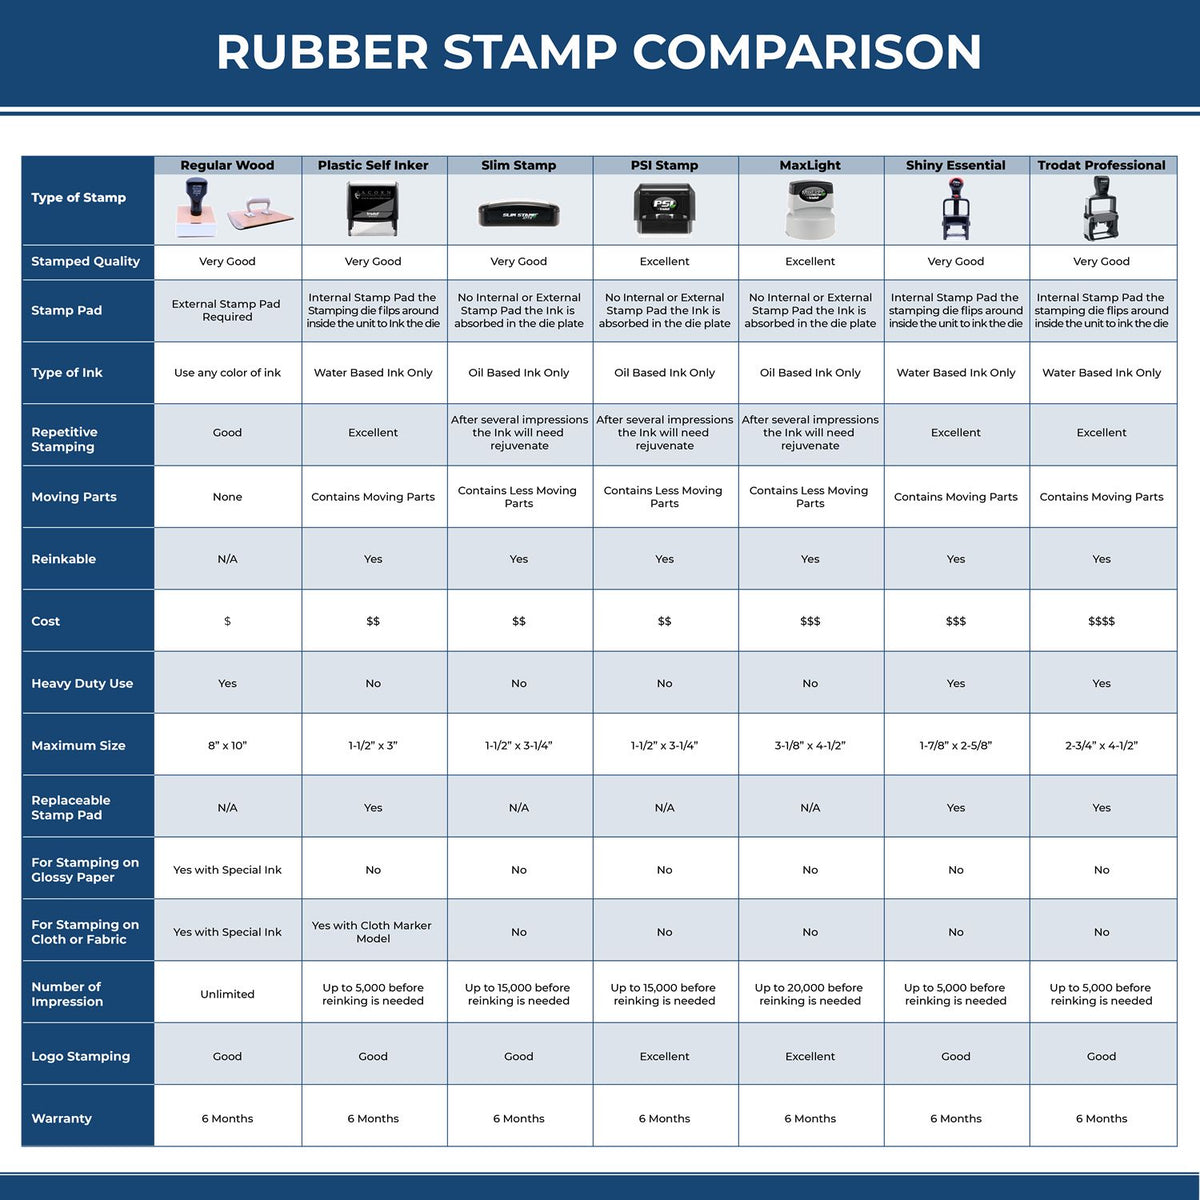 Large Courtesy Copy Original Filed Electronically Rubber Stamp 4853R Rubber Stamp Comparison